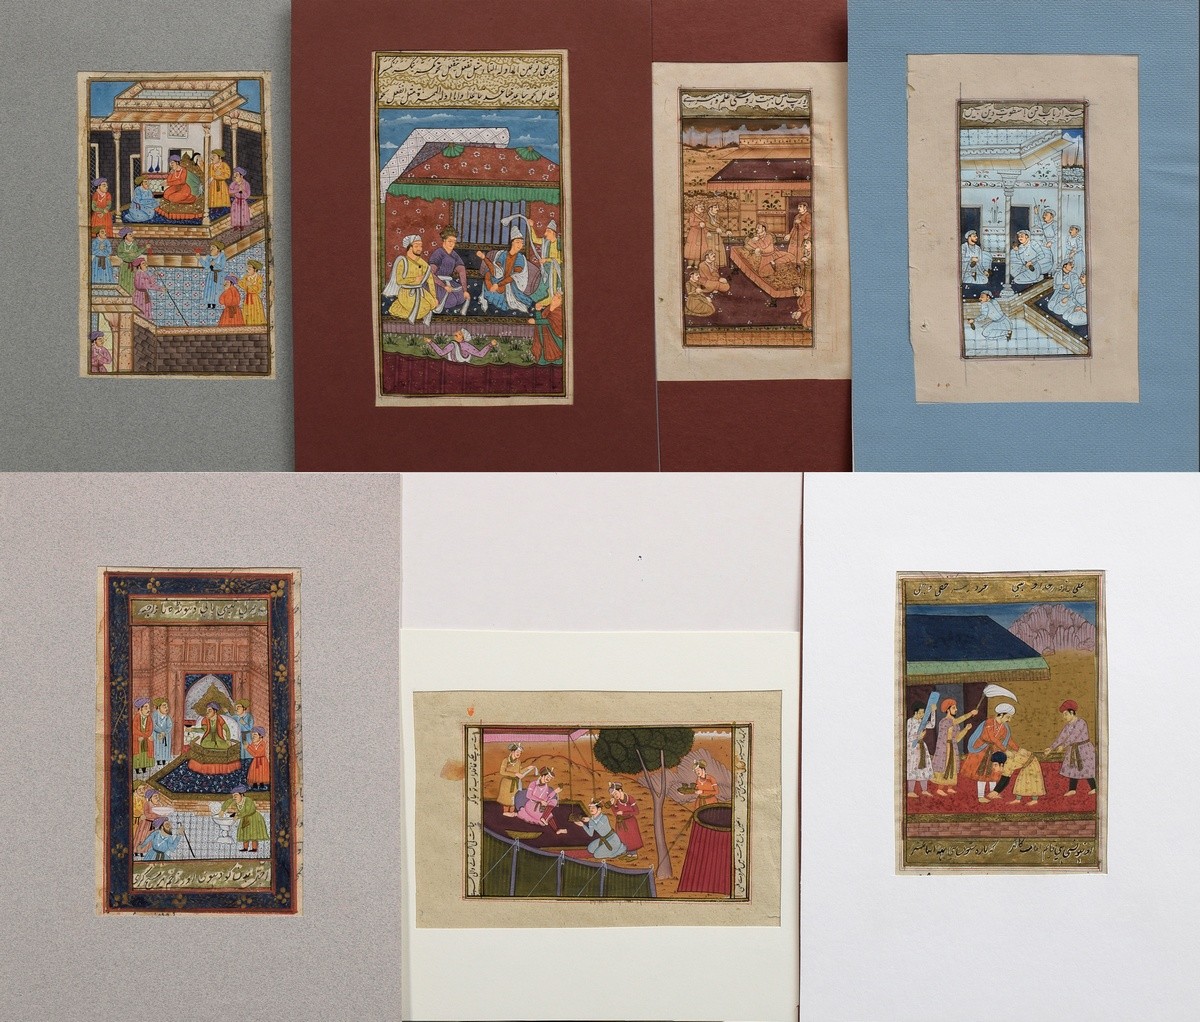 7 Various Indo-Persian miniatures "Audience scenes" from manuscripts, 18th/19th century, opaque col